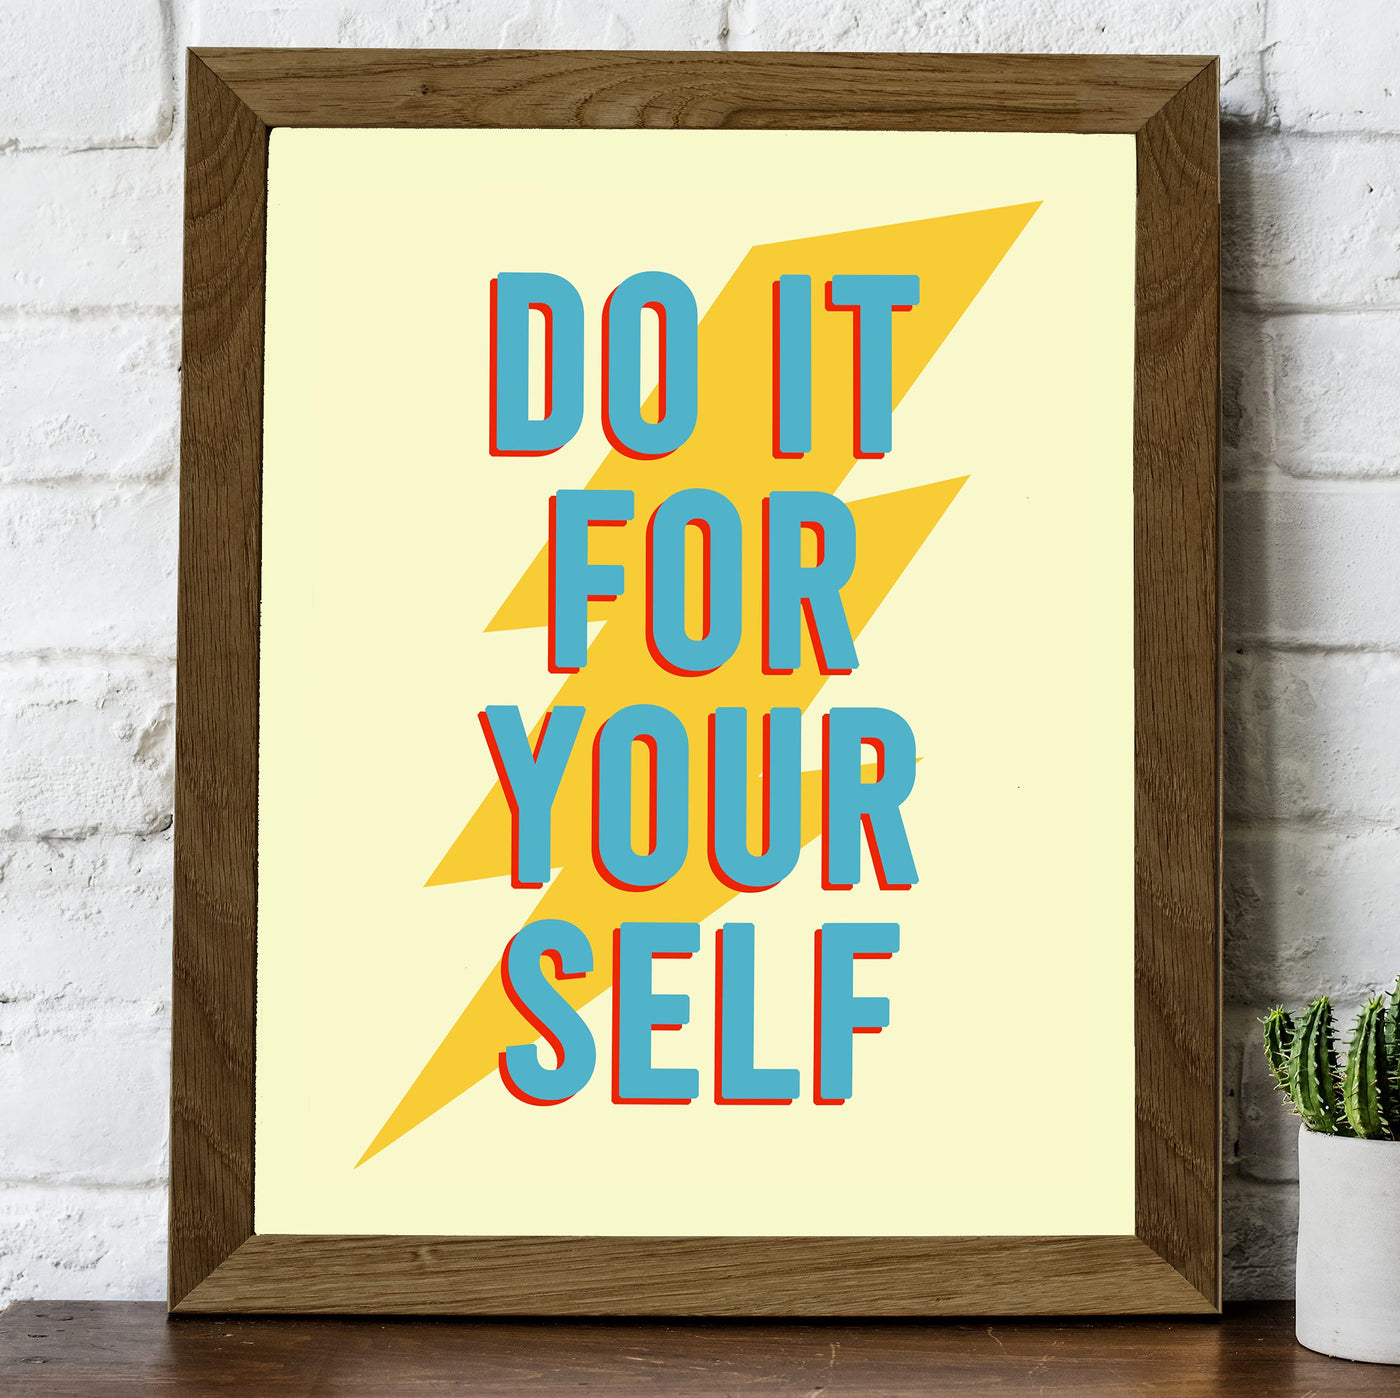 Do It For Yourself Motivational Wall Decor -8 x 10" Inspirational Typographic Art Print w/Lightning Bolt Image-Ready to Frame. Perfect Home-Office-Desk-School-Gym Decor! Great Sign for Motivation!